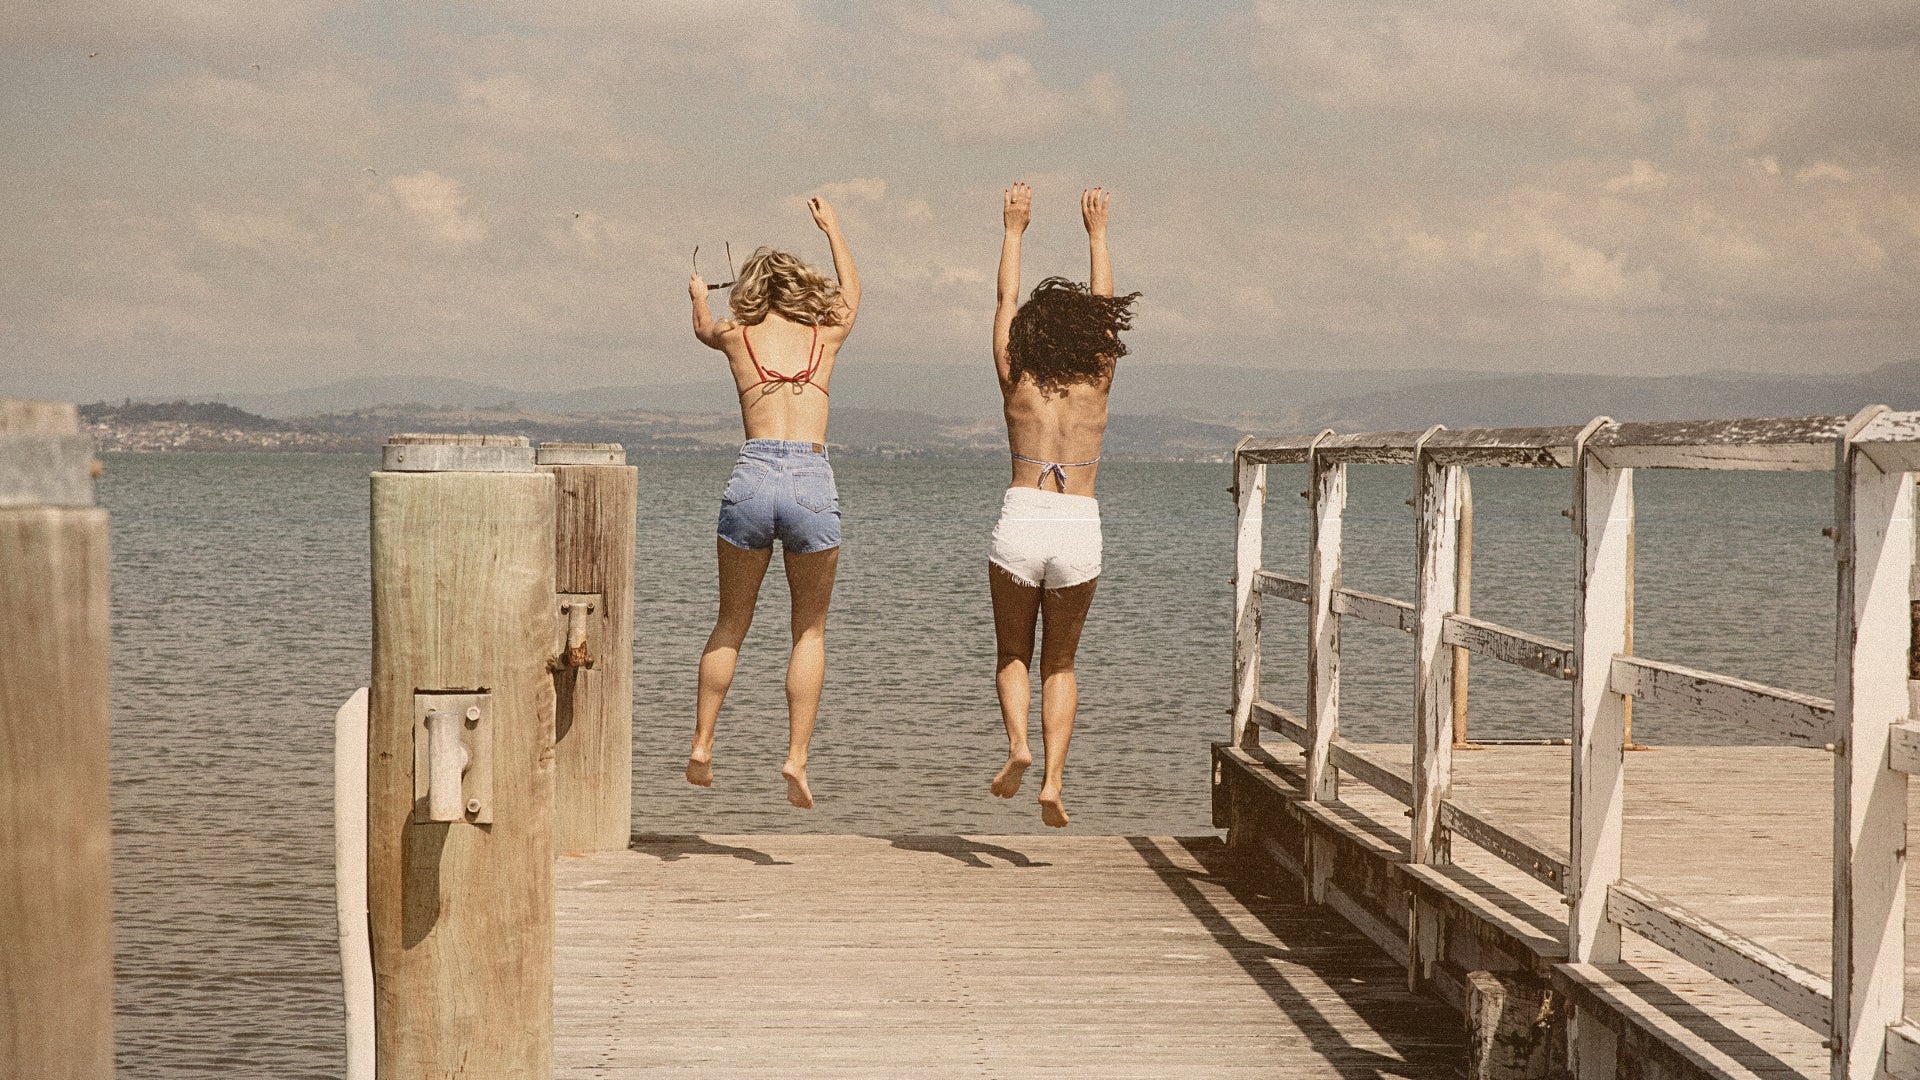 Two women jumping off the dock in swimsuits